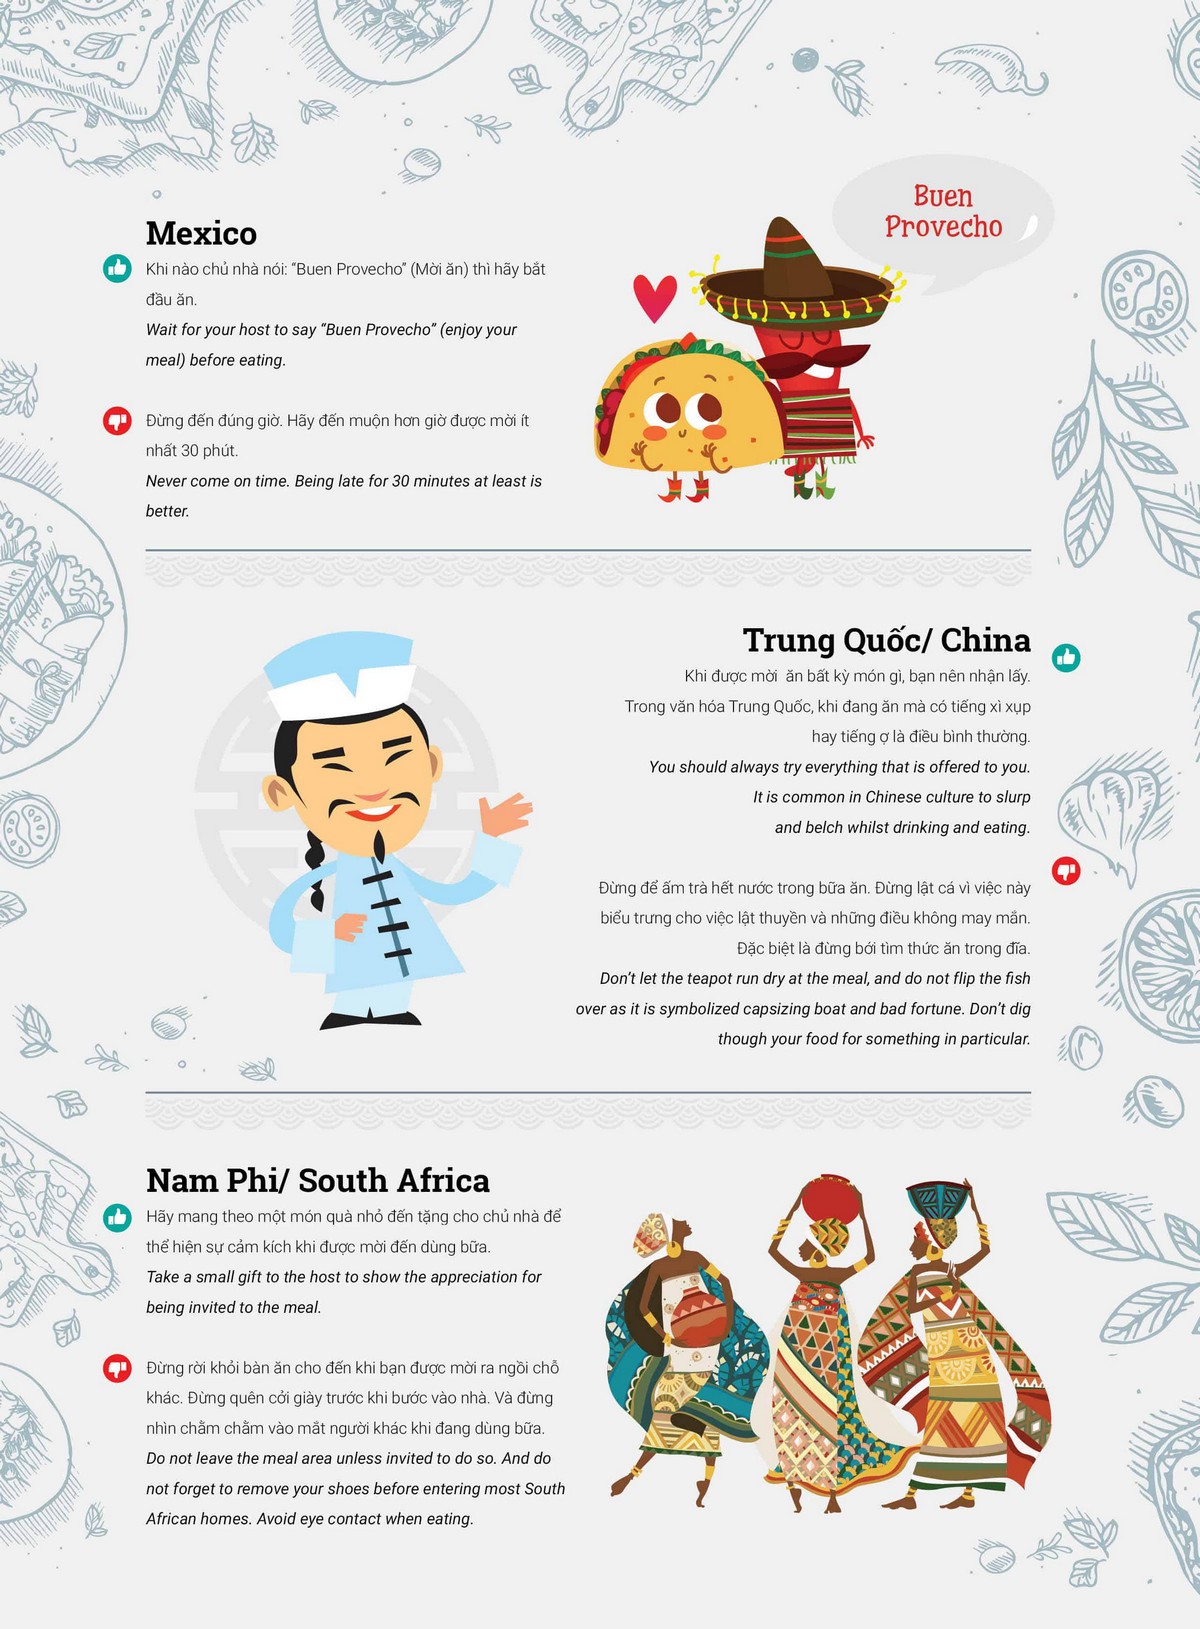 Wanderlust Tips Magazine | Dining etiquette in different countries